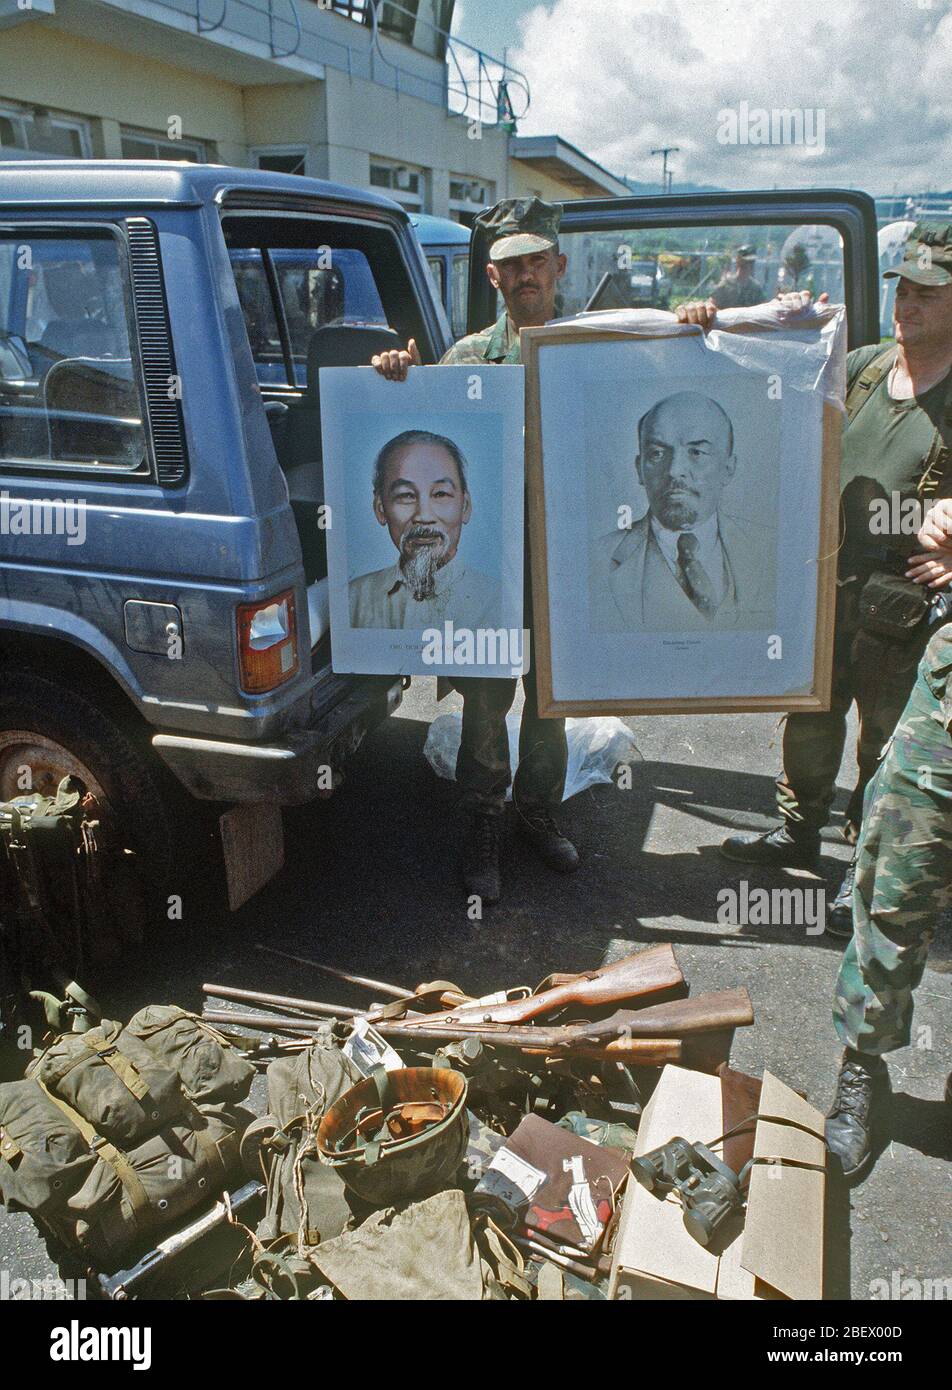 U.S. Marines display portraits of Ho Chi Minh and Vladimir Ilyich Lenin that were seized at Pearls Airport during the multi-service, multinational Operation Urgent Fury in Grenada. Stock Photo